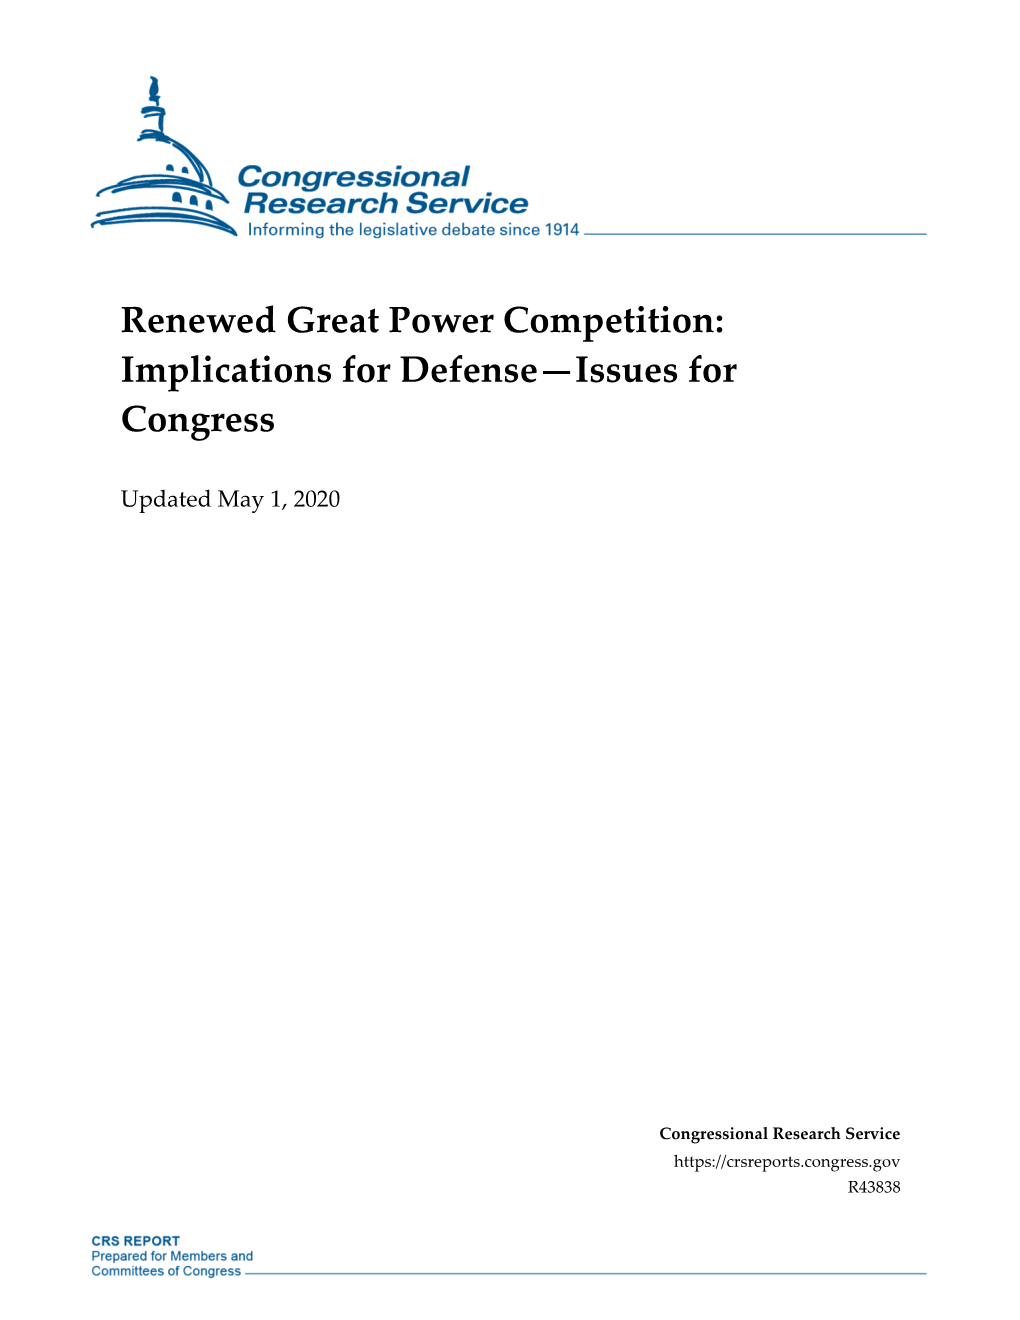 Renewed Great Power Competition: Implications for Defense—Issues for Congress